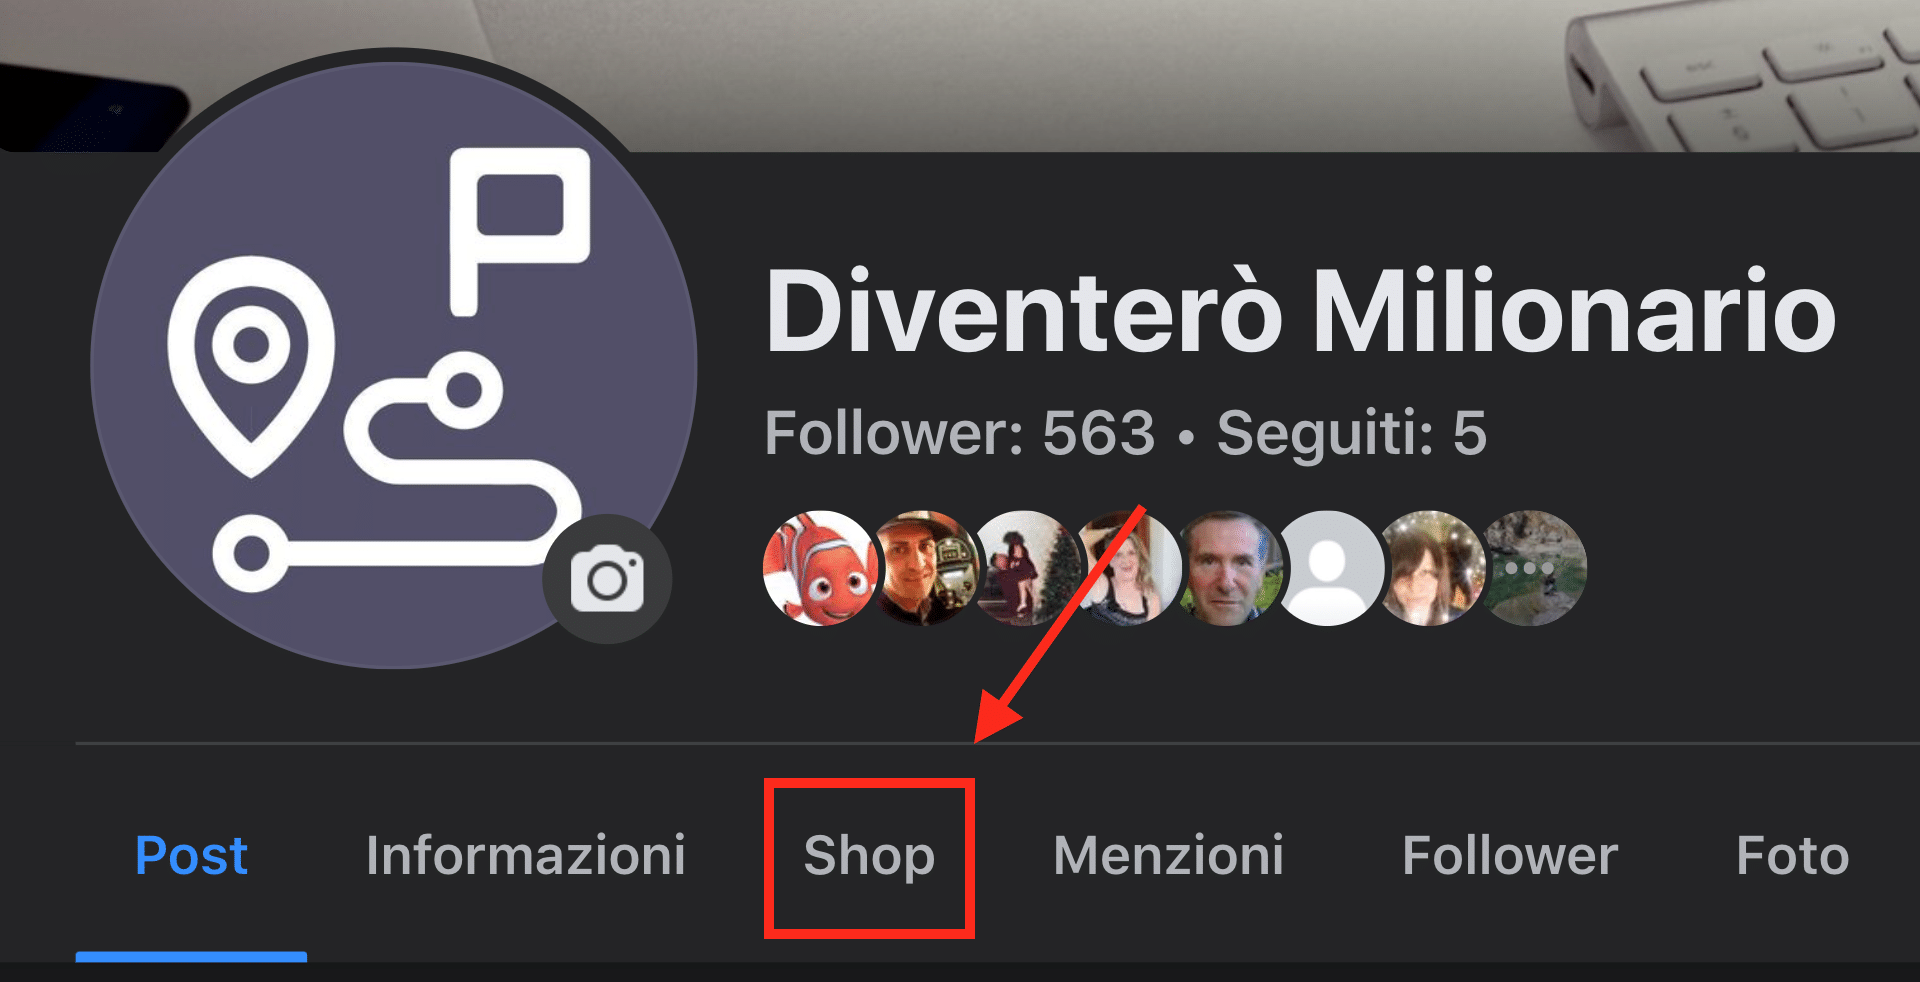 In the Diventerò Milionario group, I activated al store section to earn with e-commerce